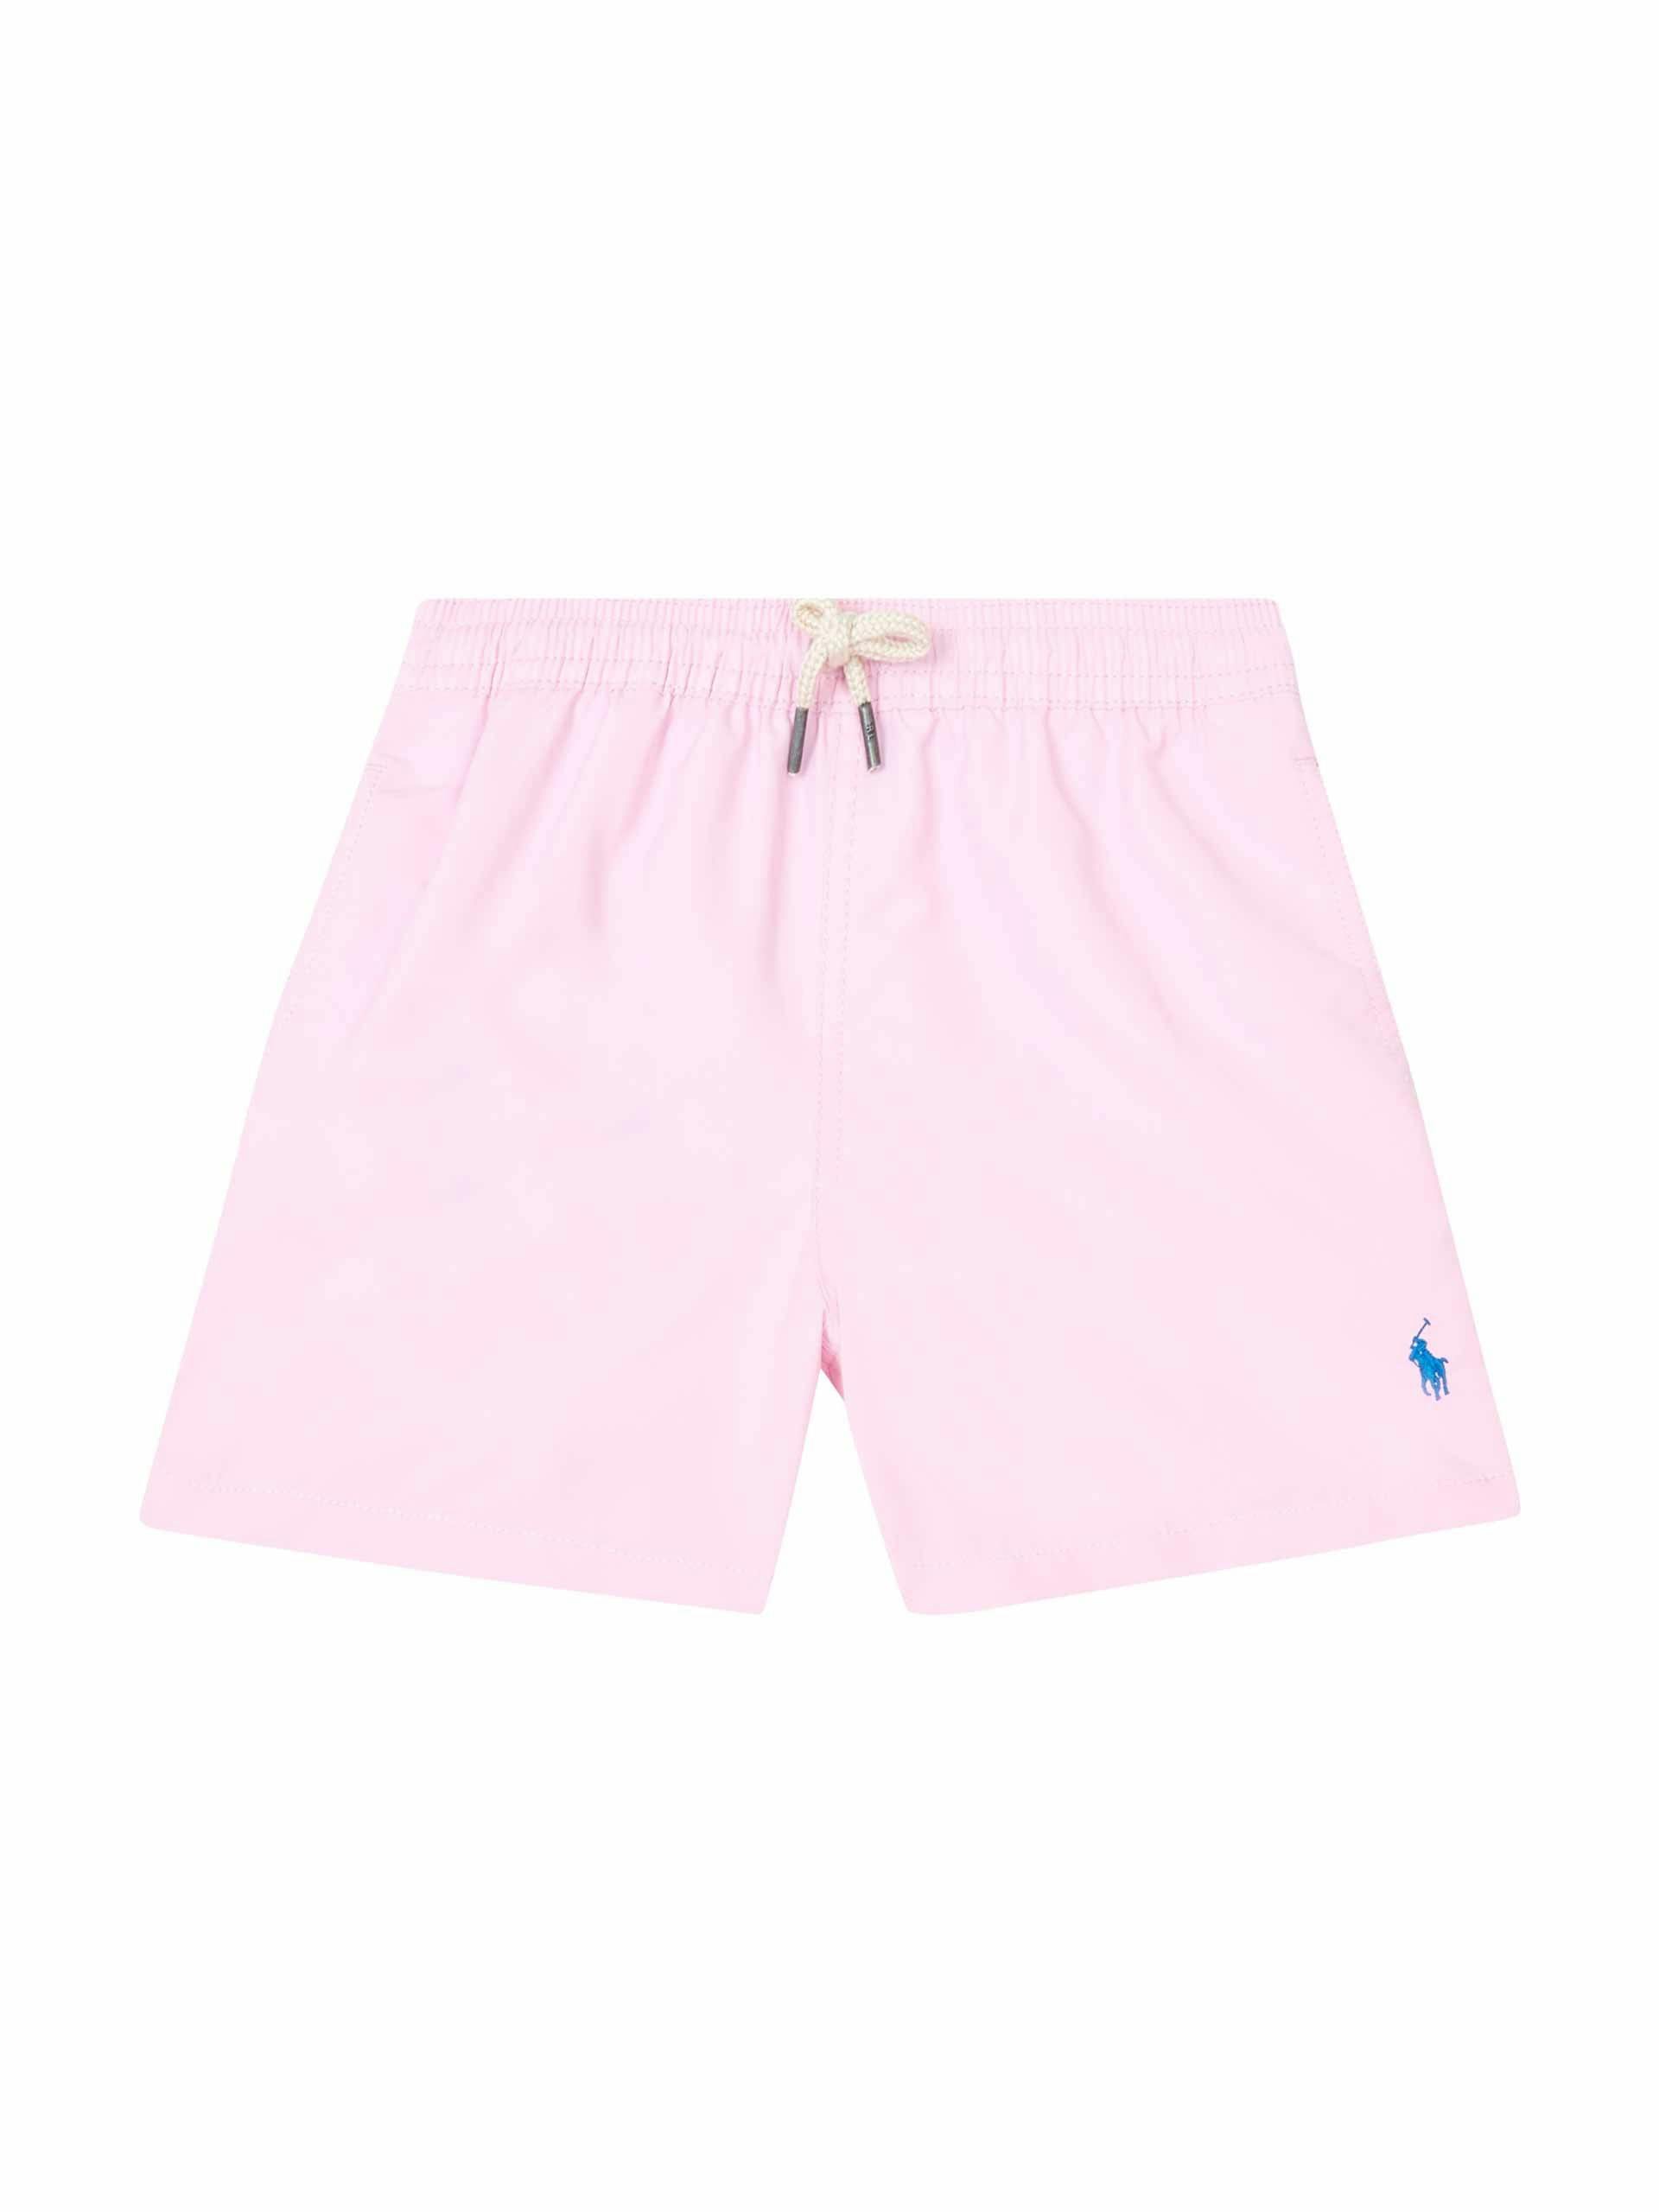 Pink swimming trunks